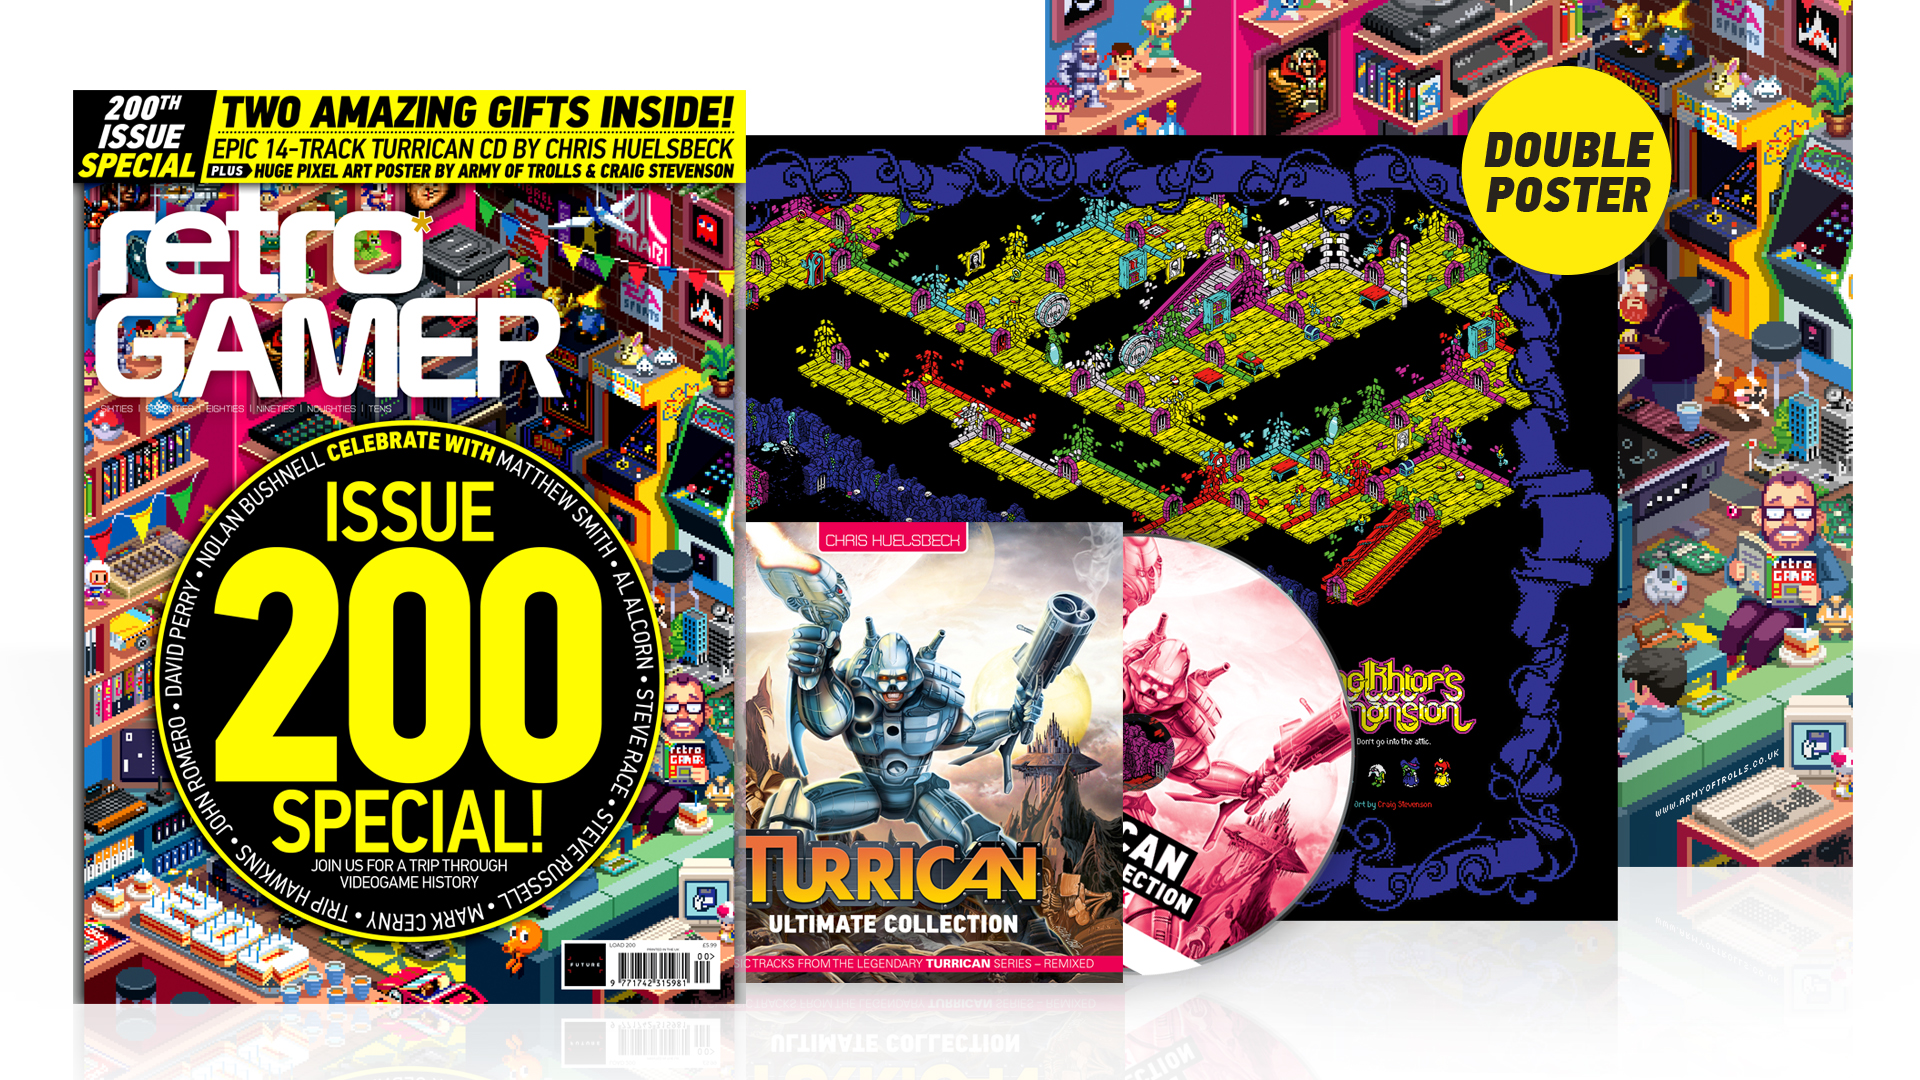 Mark Cerny, David Braben, and other legends talk through gaming history in Retro Gamer’s 200th issue